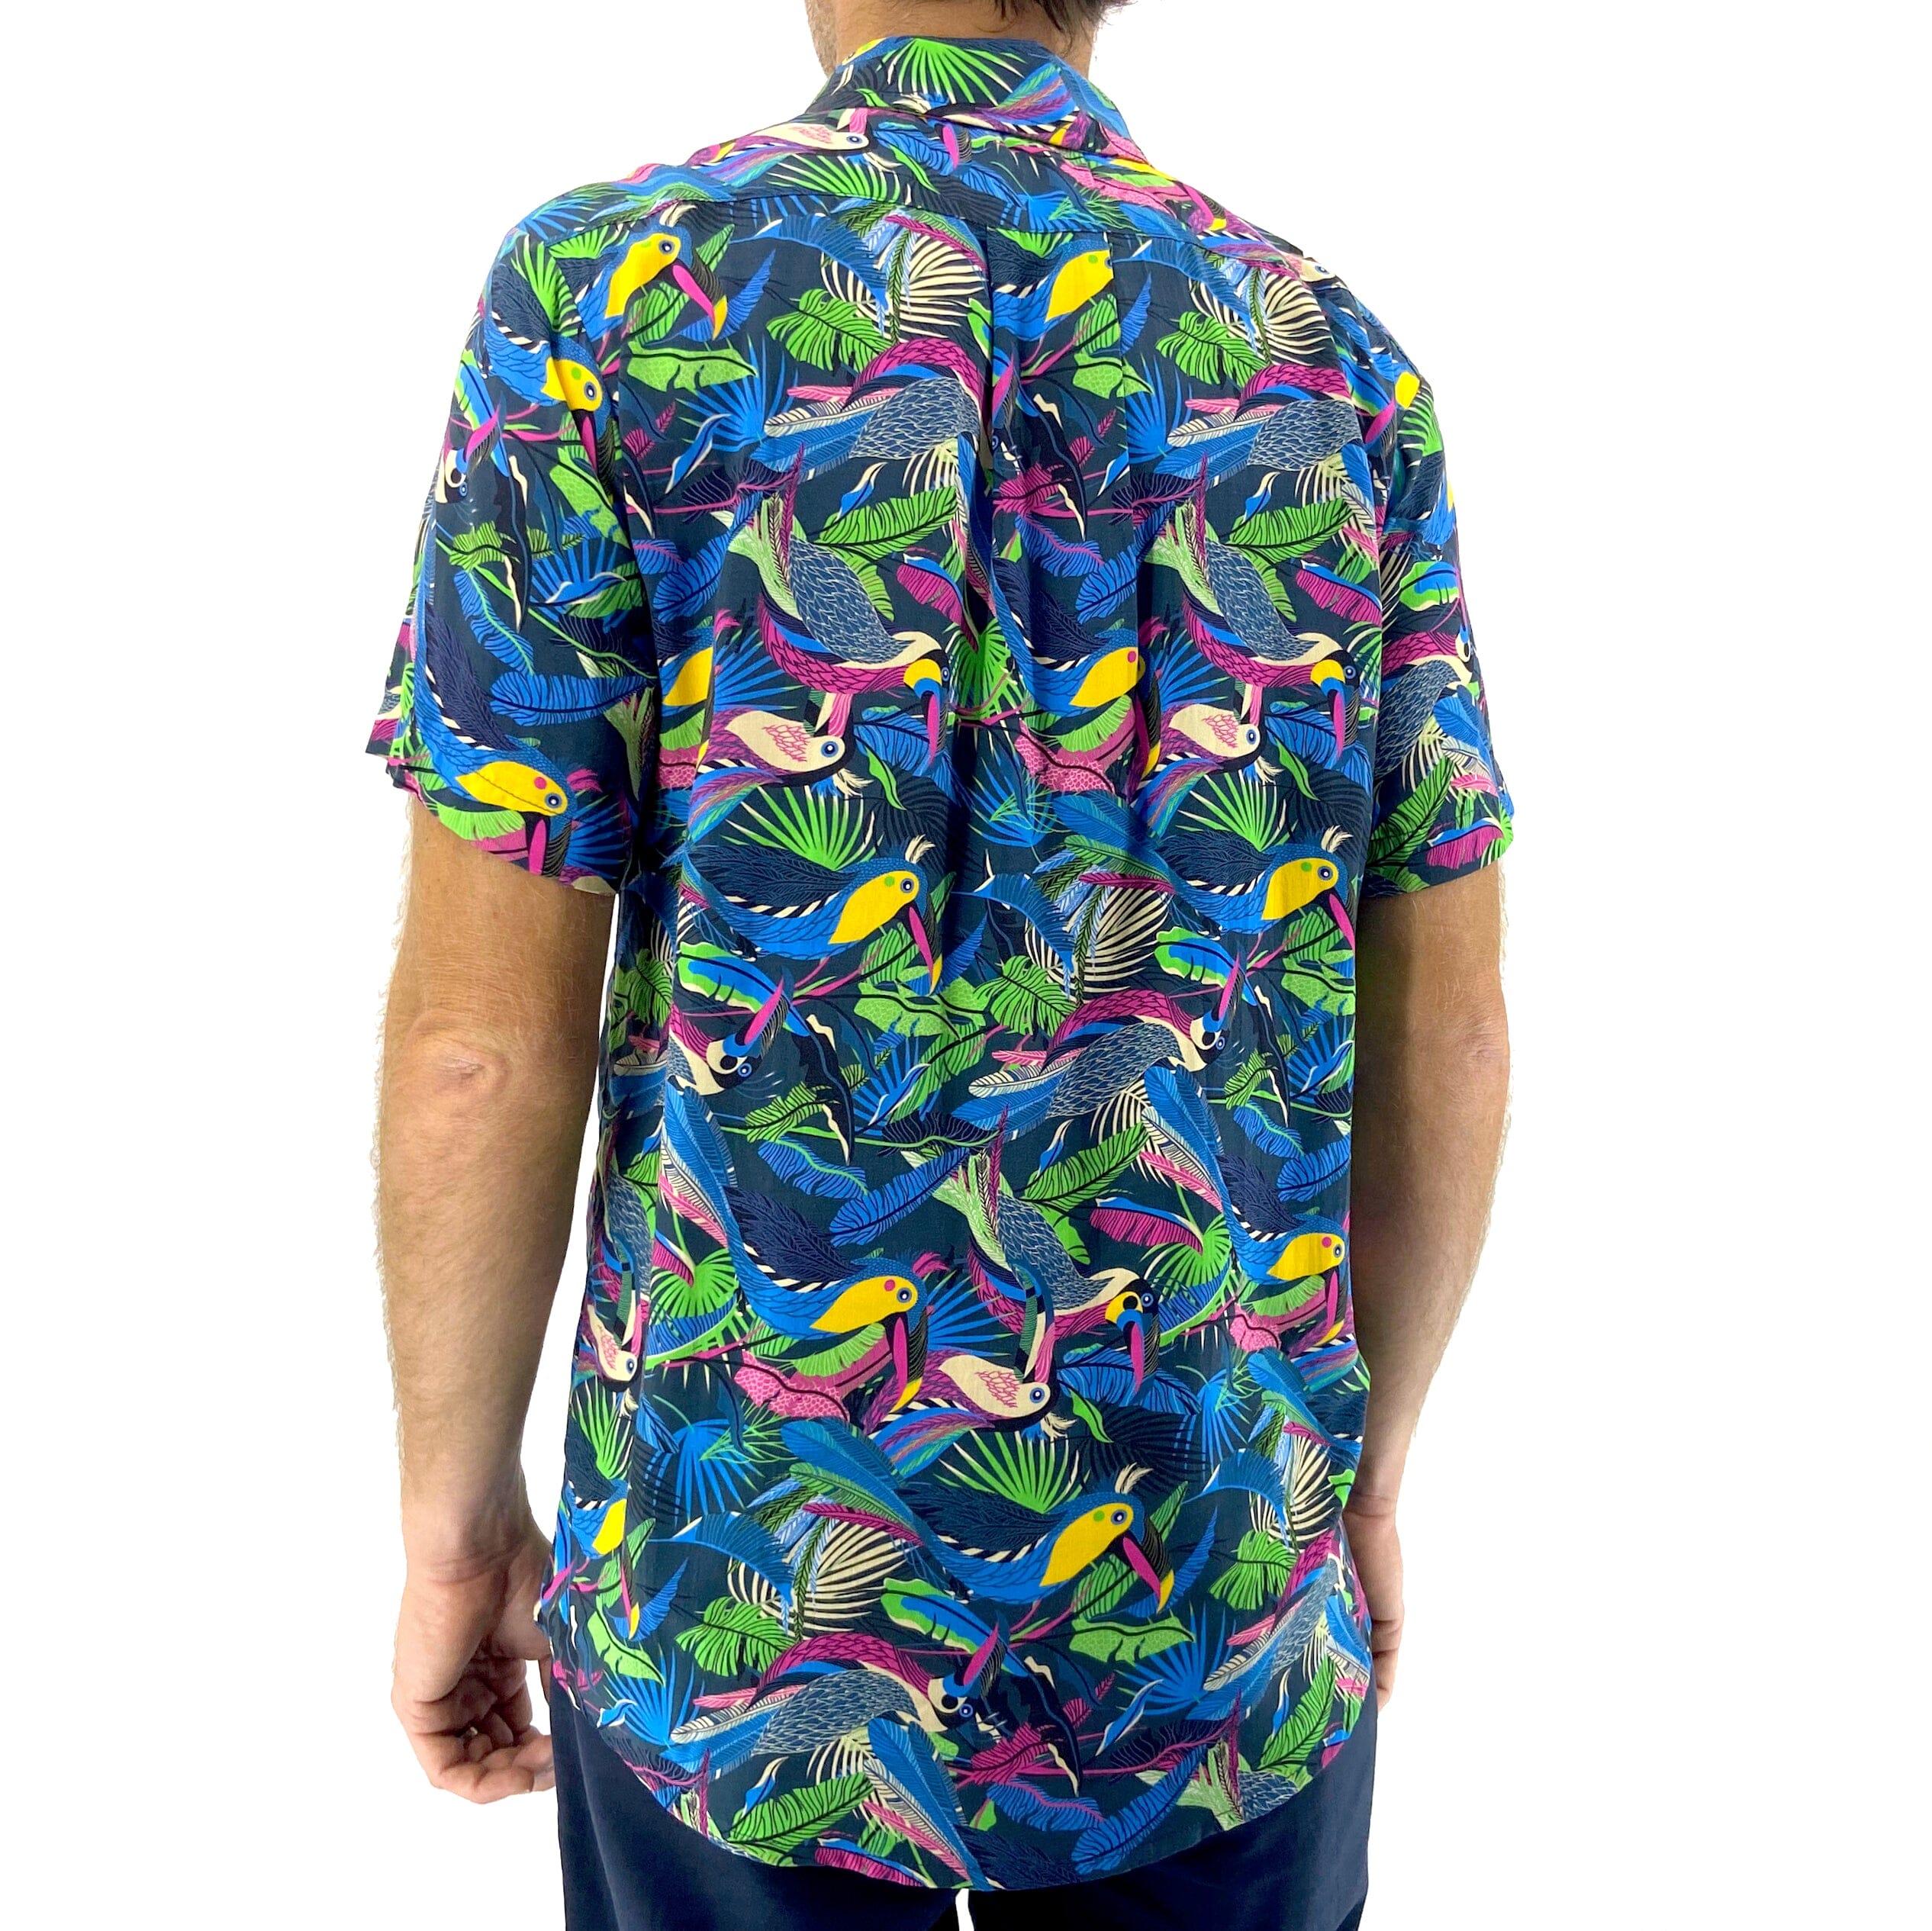 Men's Colorful Tropical Toco Toucan Birds Patterned Button Down Shirt